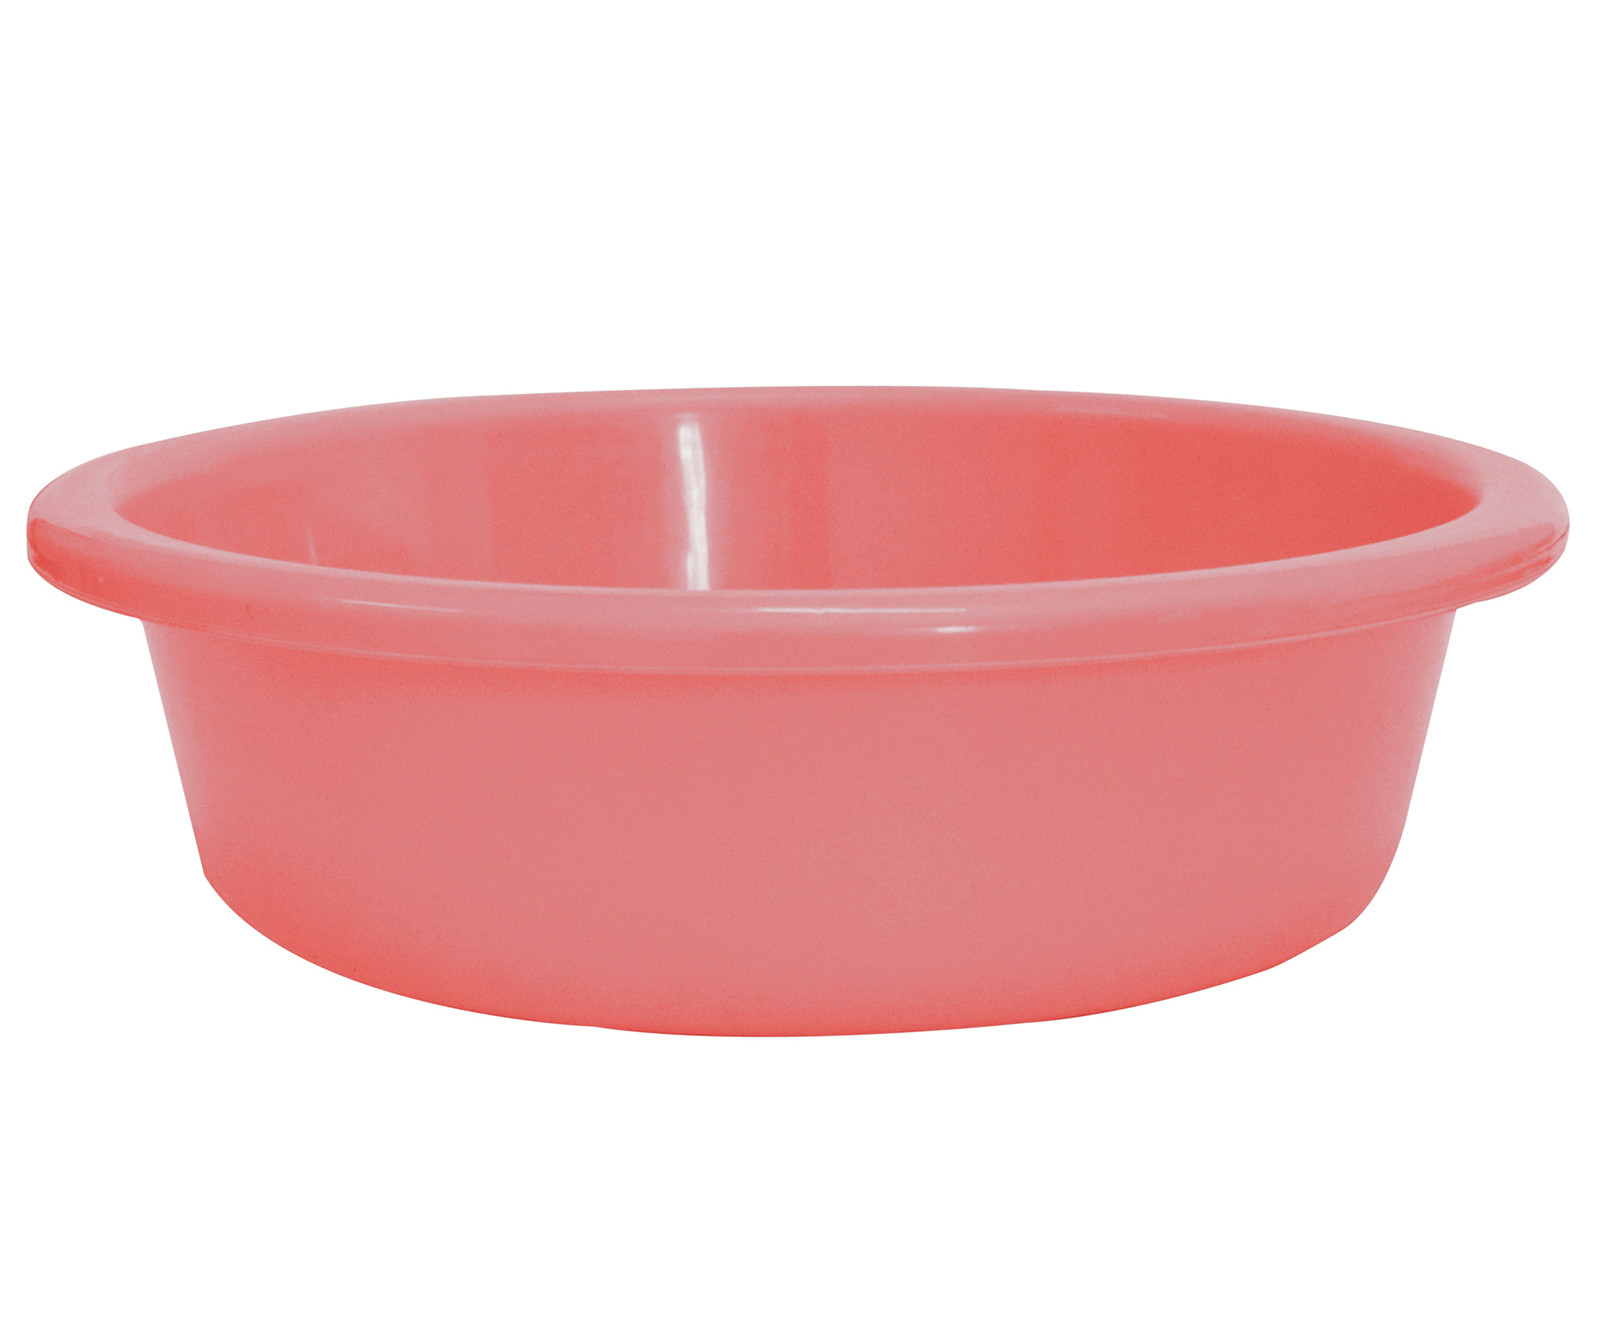 Kuber Industries Multiuses Unbreakable Plastic Knead Dough Basket/Basin Bowl For Home & Kitchen 6 Ltr- Pack of 2 (Light Pink & Grey)